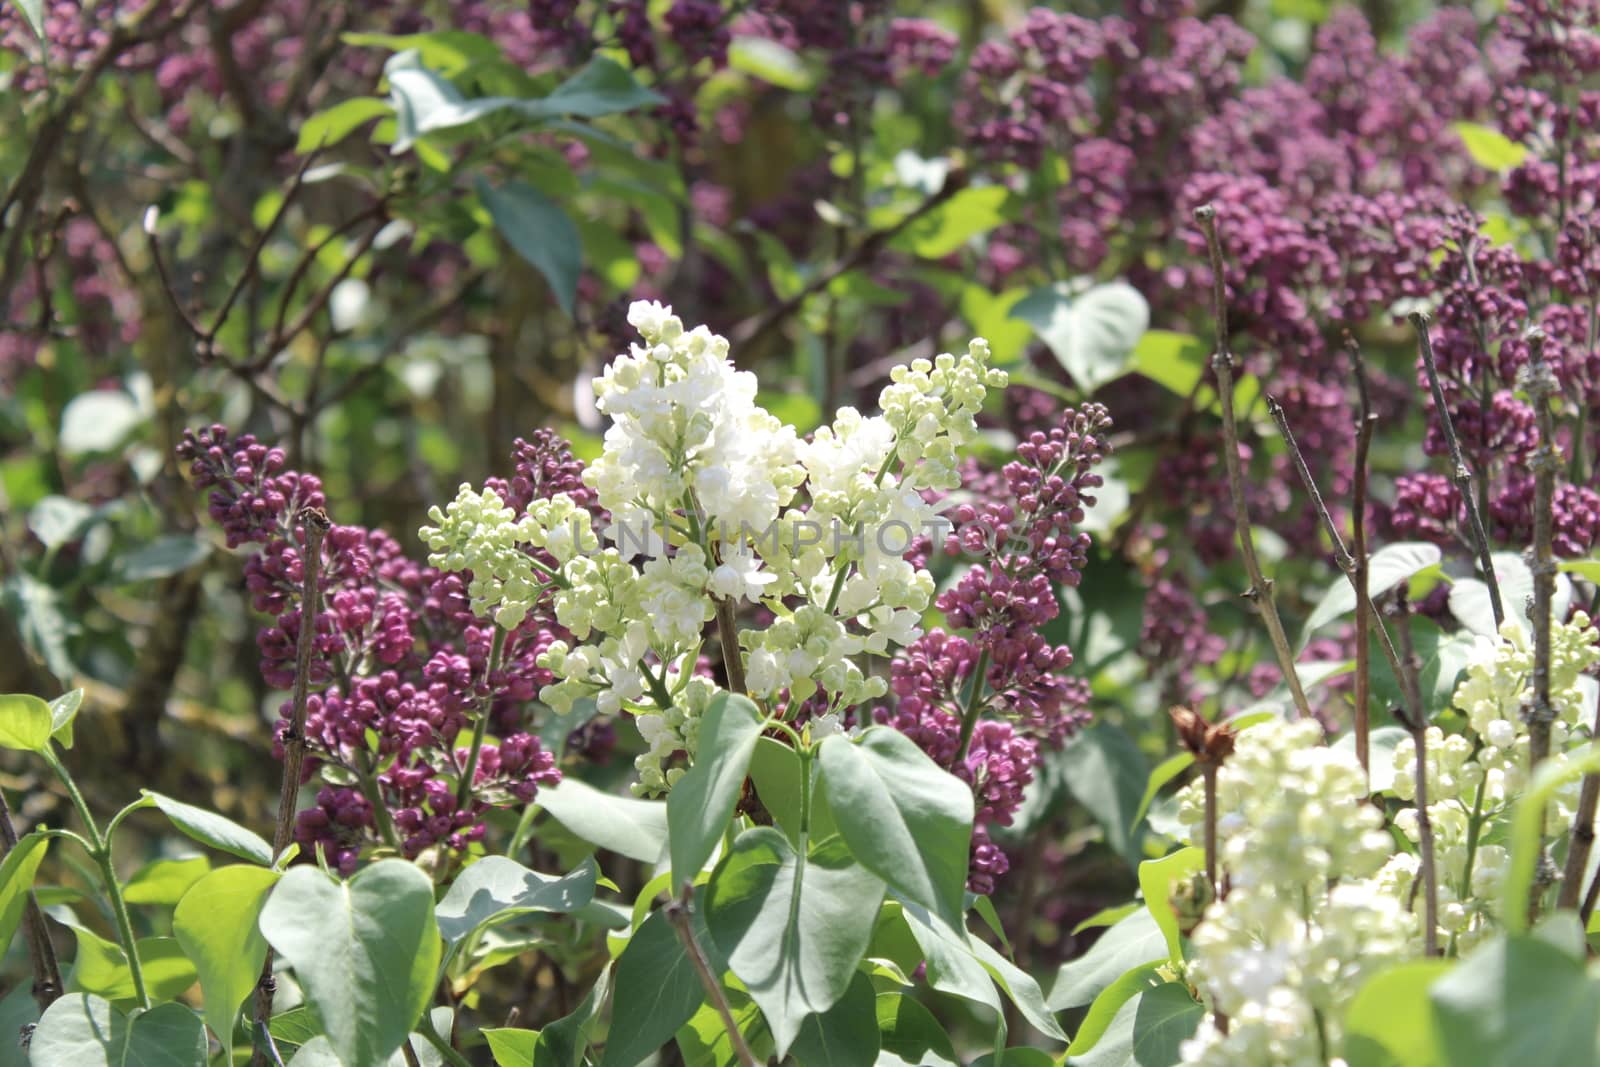 The picture shows lilac in the garden in the spring.